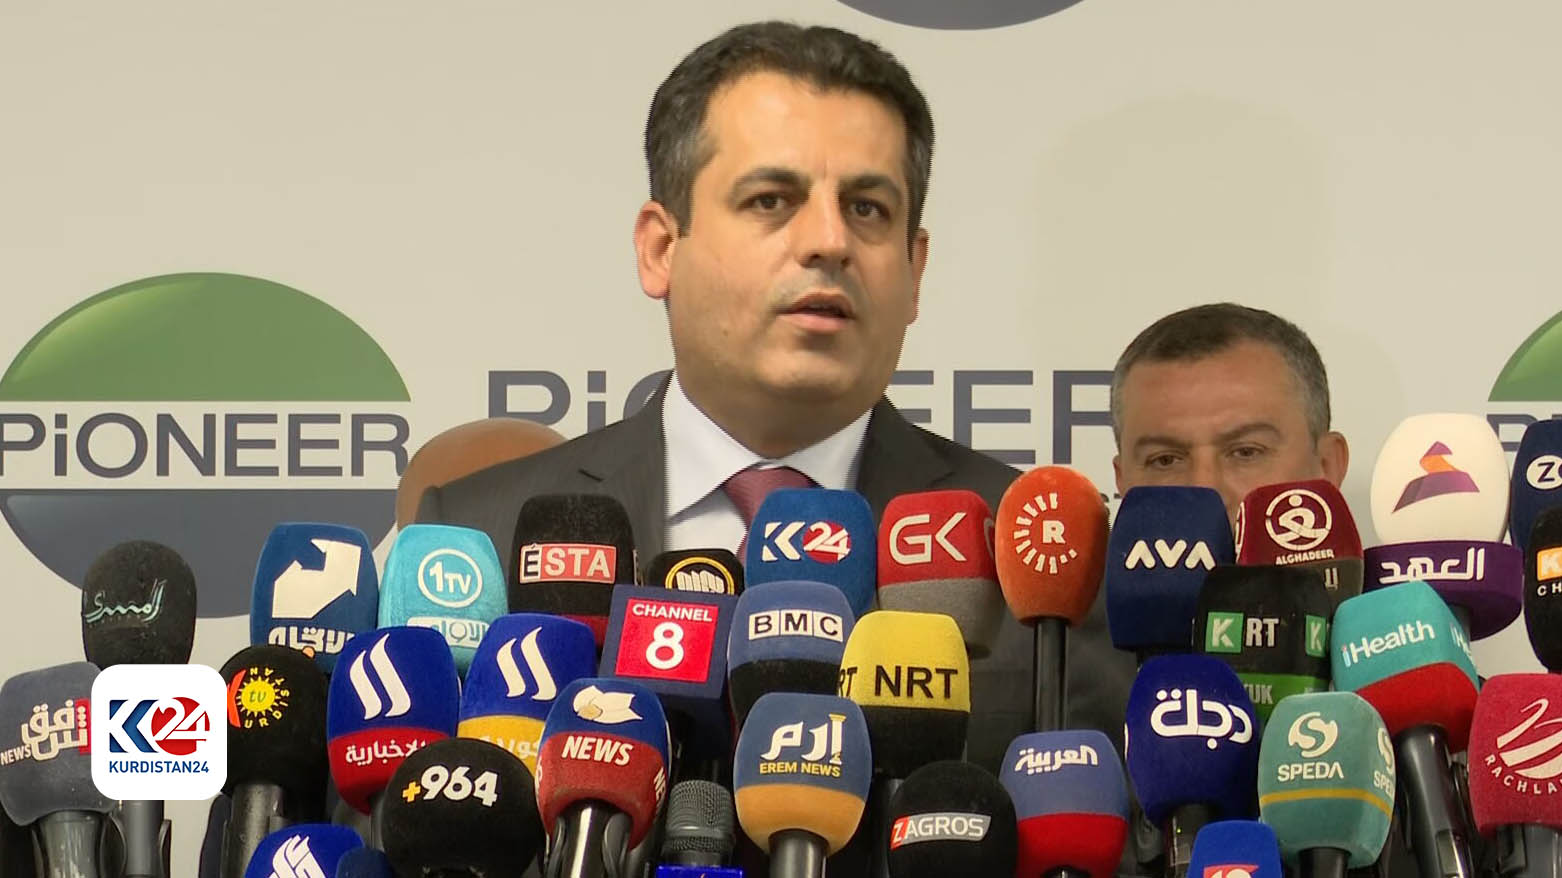 KRG's Health Minister Dr. Saman Barzinji speaking in a press conference in Sulaimani, March 7. (Photo: Kurdistan 24)